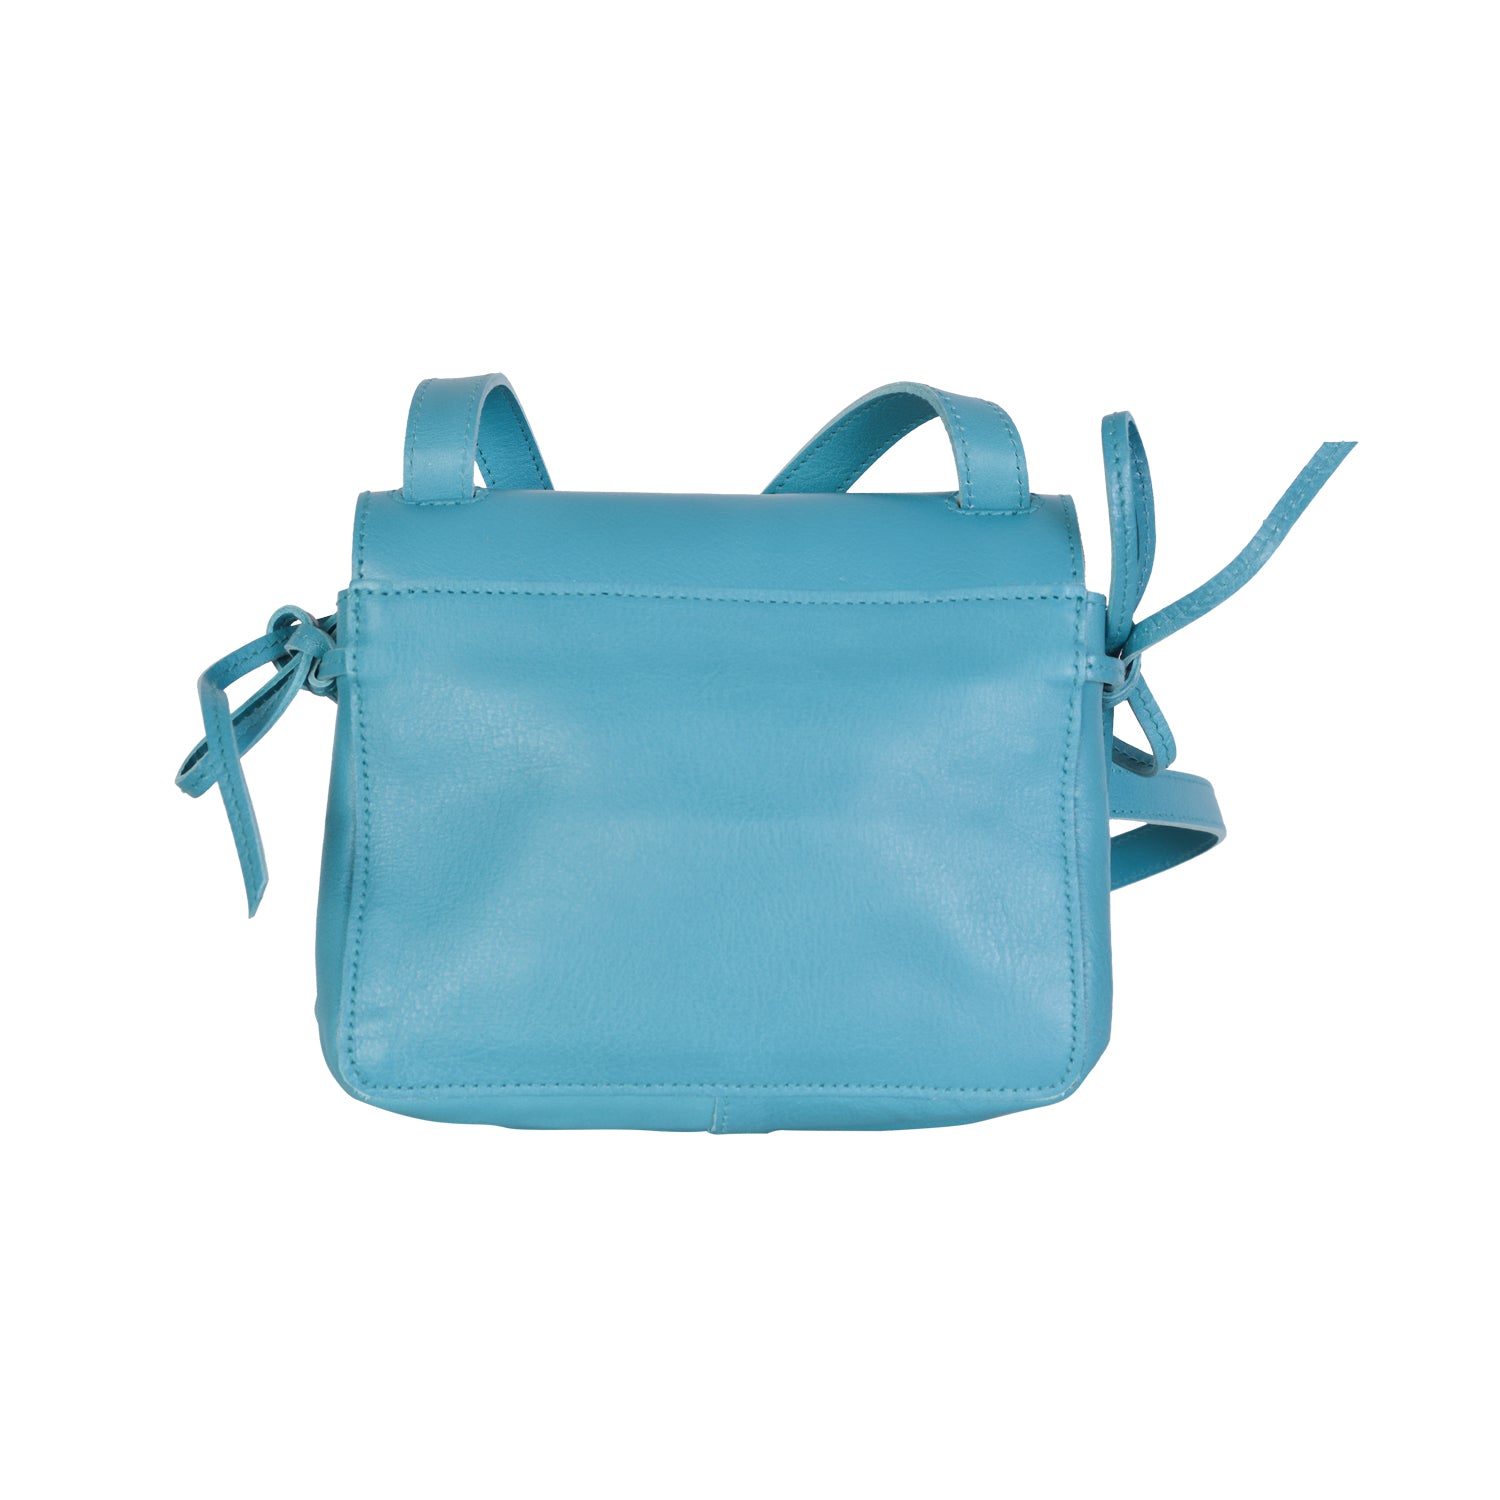 NEW IL BISONTE WOMEN'S SOFFIETTO COLLECTION CROSSBODY BAG IN TURQUOISE LEATHER